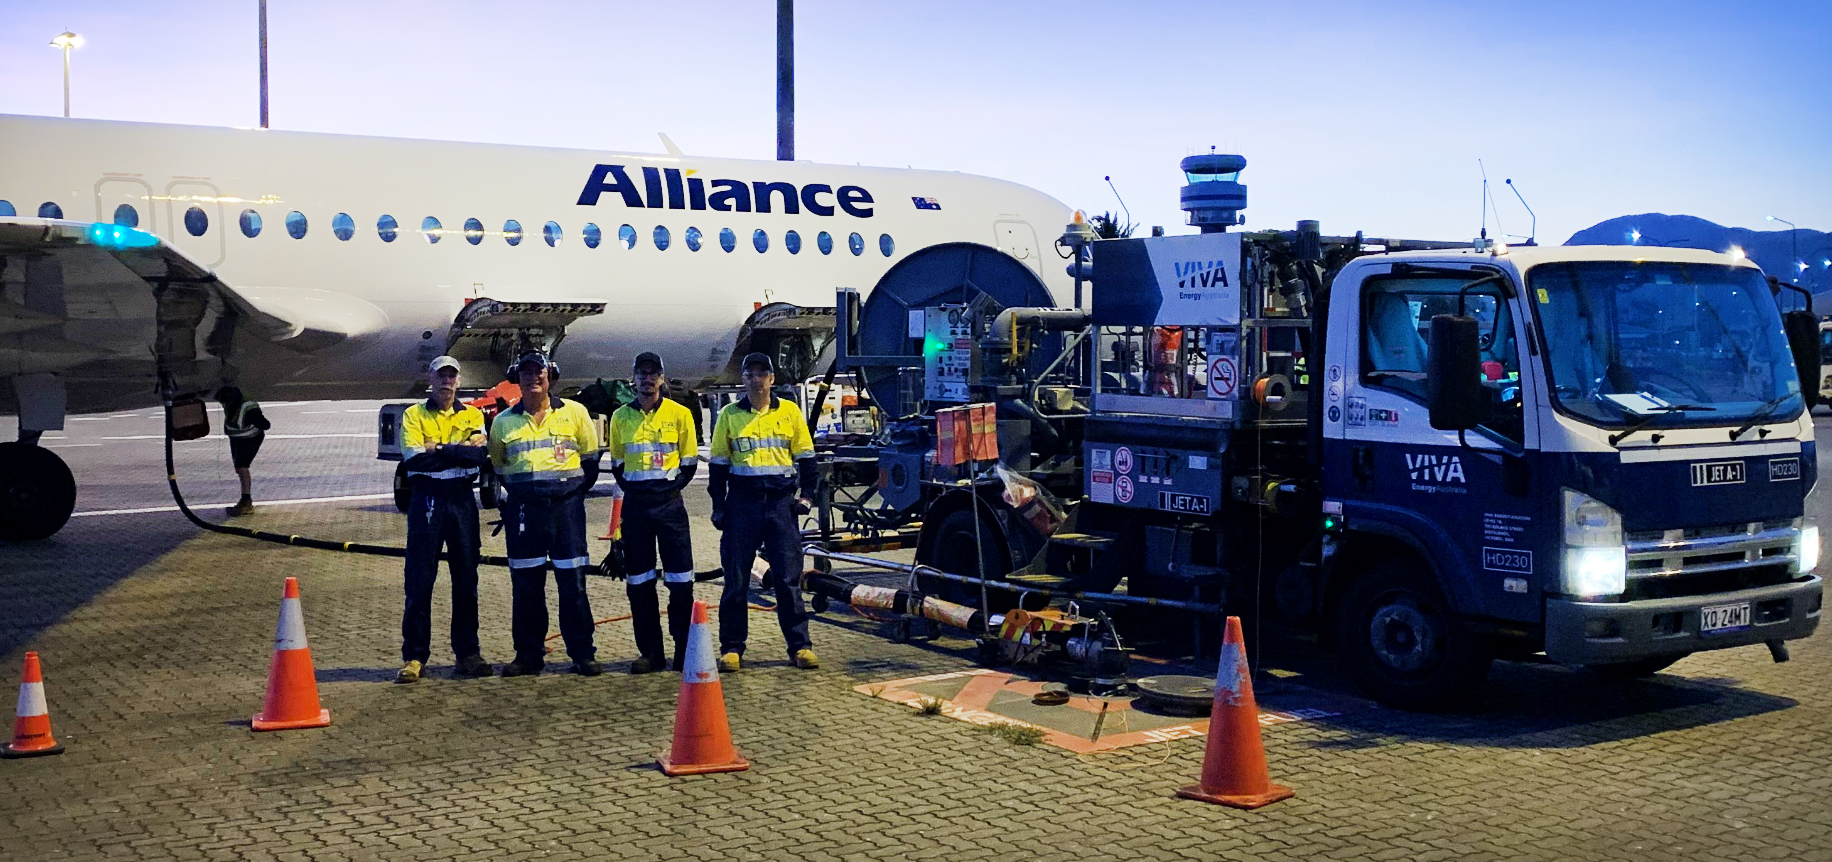 Carbon Neutral Refuel Alliance QQ7242 Cairns to Weipa 2 - IMAGE